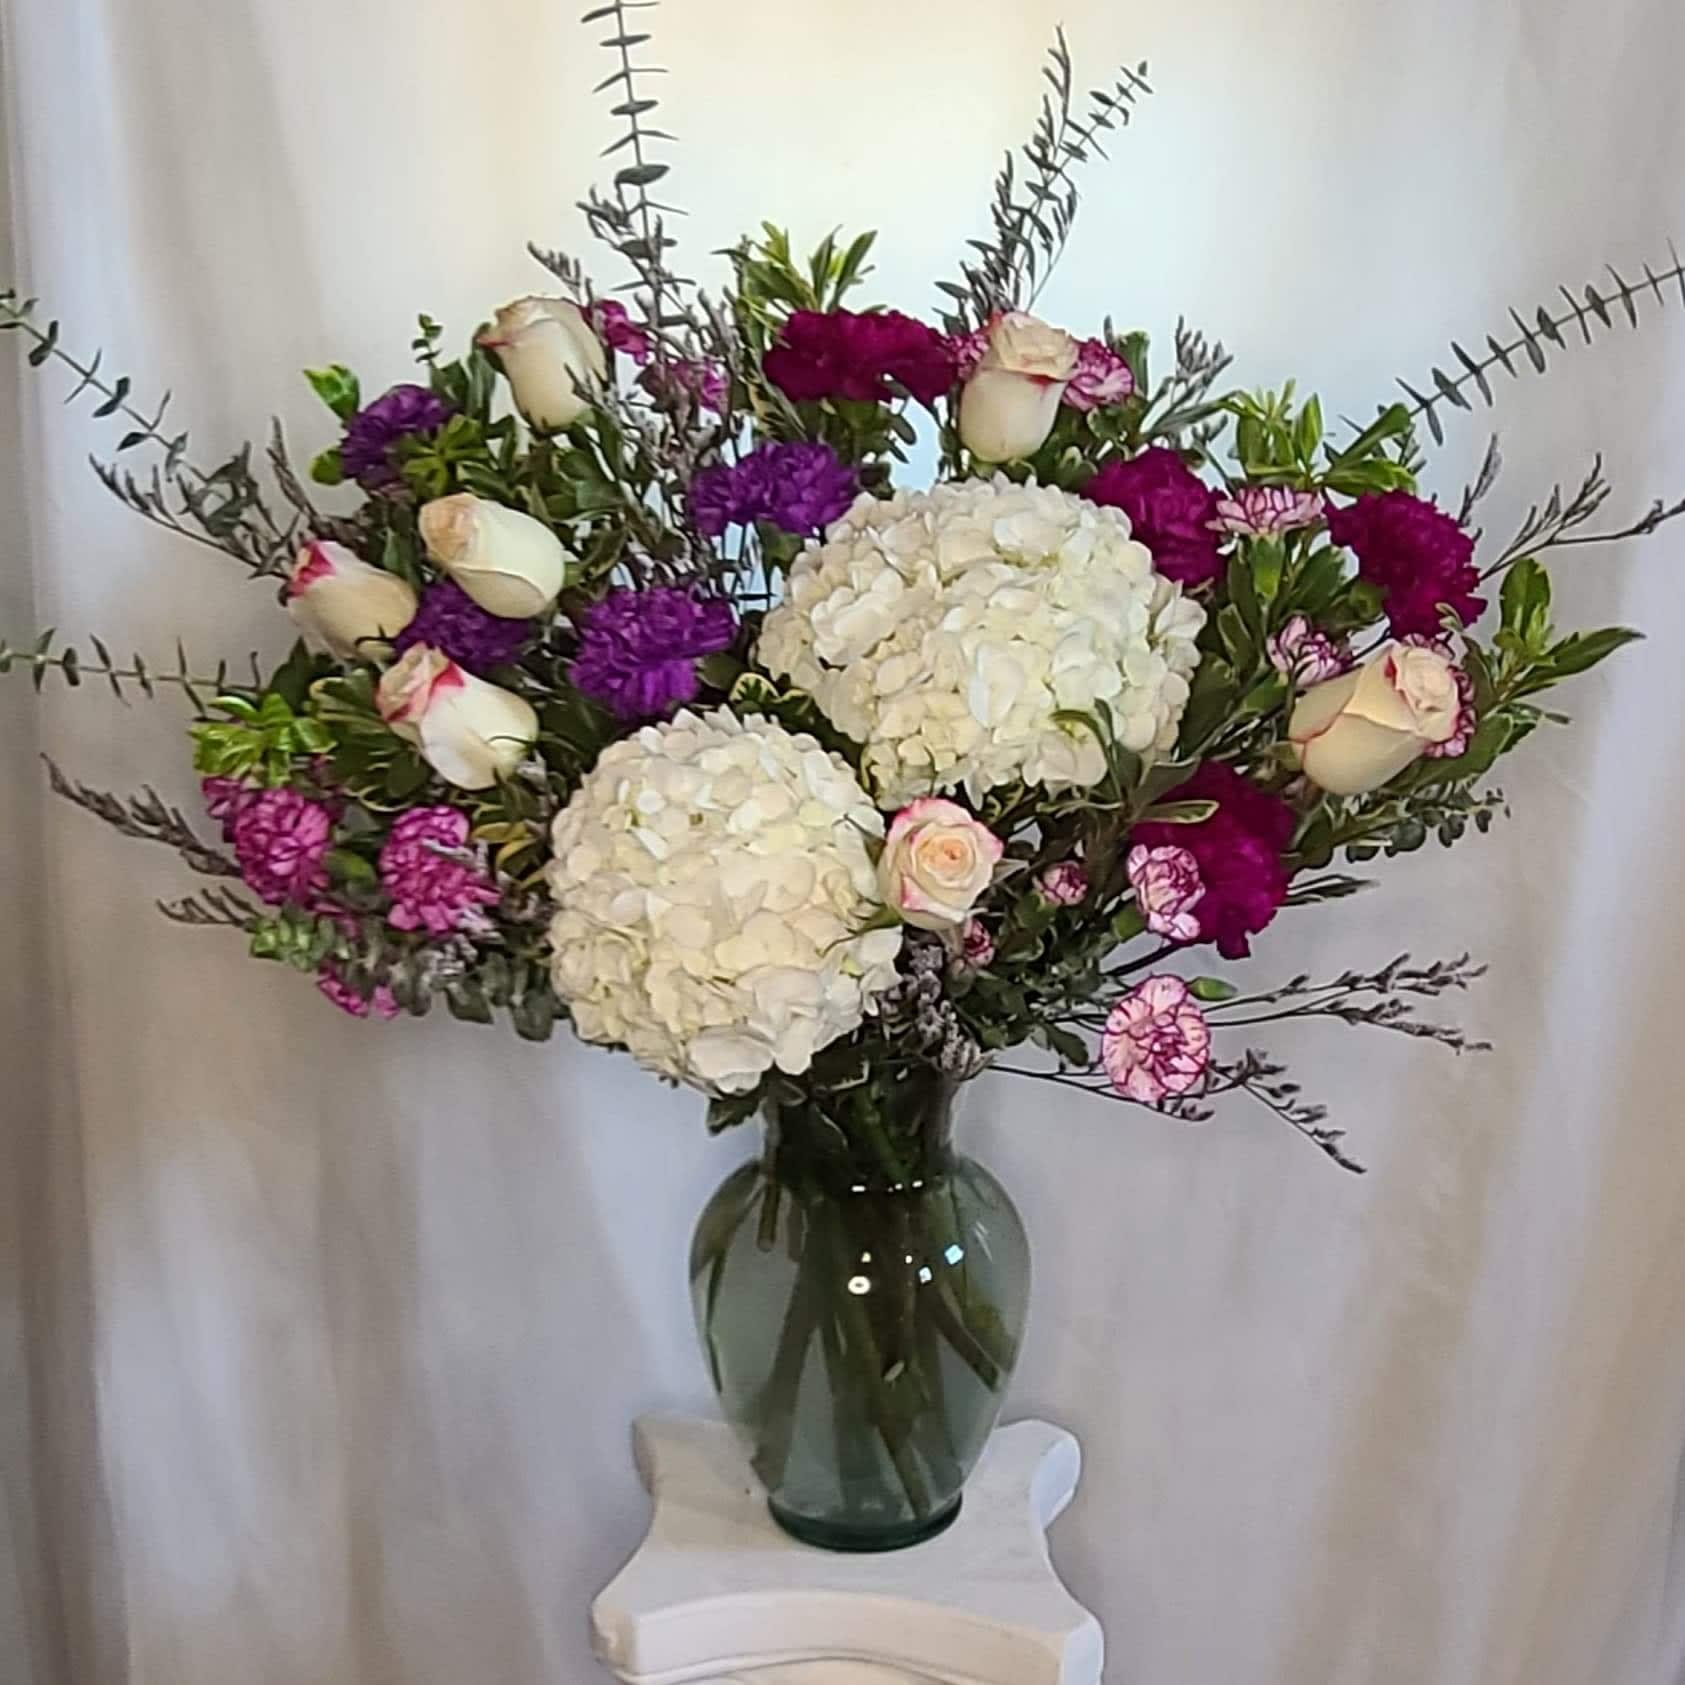 Here's to 10 - Passion created in a vase. Roses, lilies, hydrangea, carnations, with even more accents of colorand lush greens